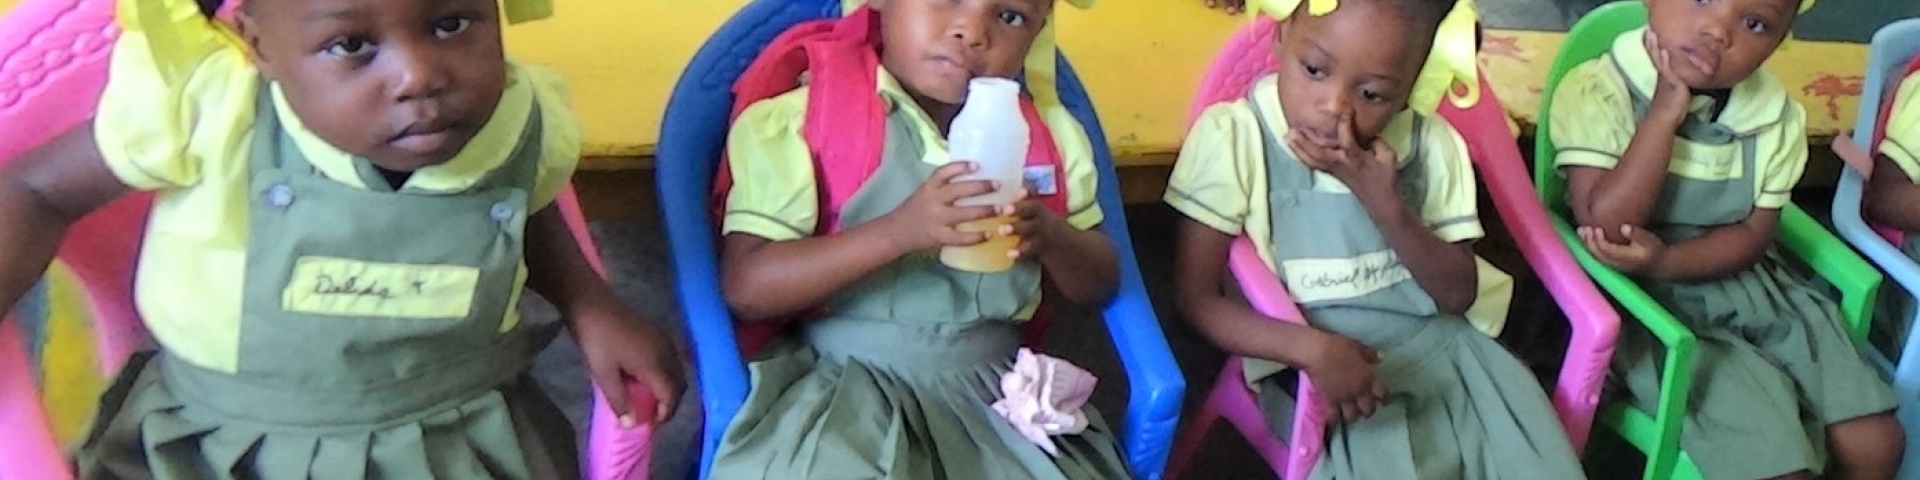 Changing Haiti's Future, One Child at a Time.